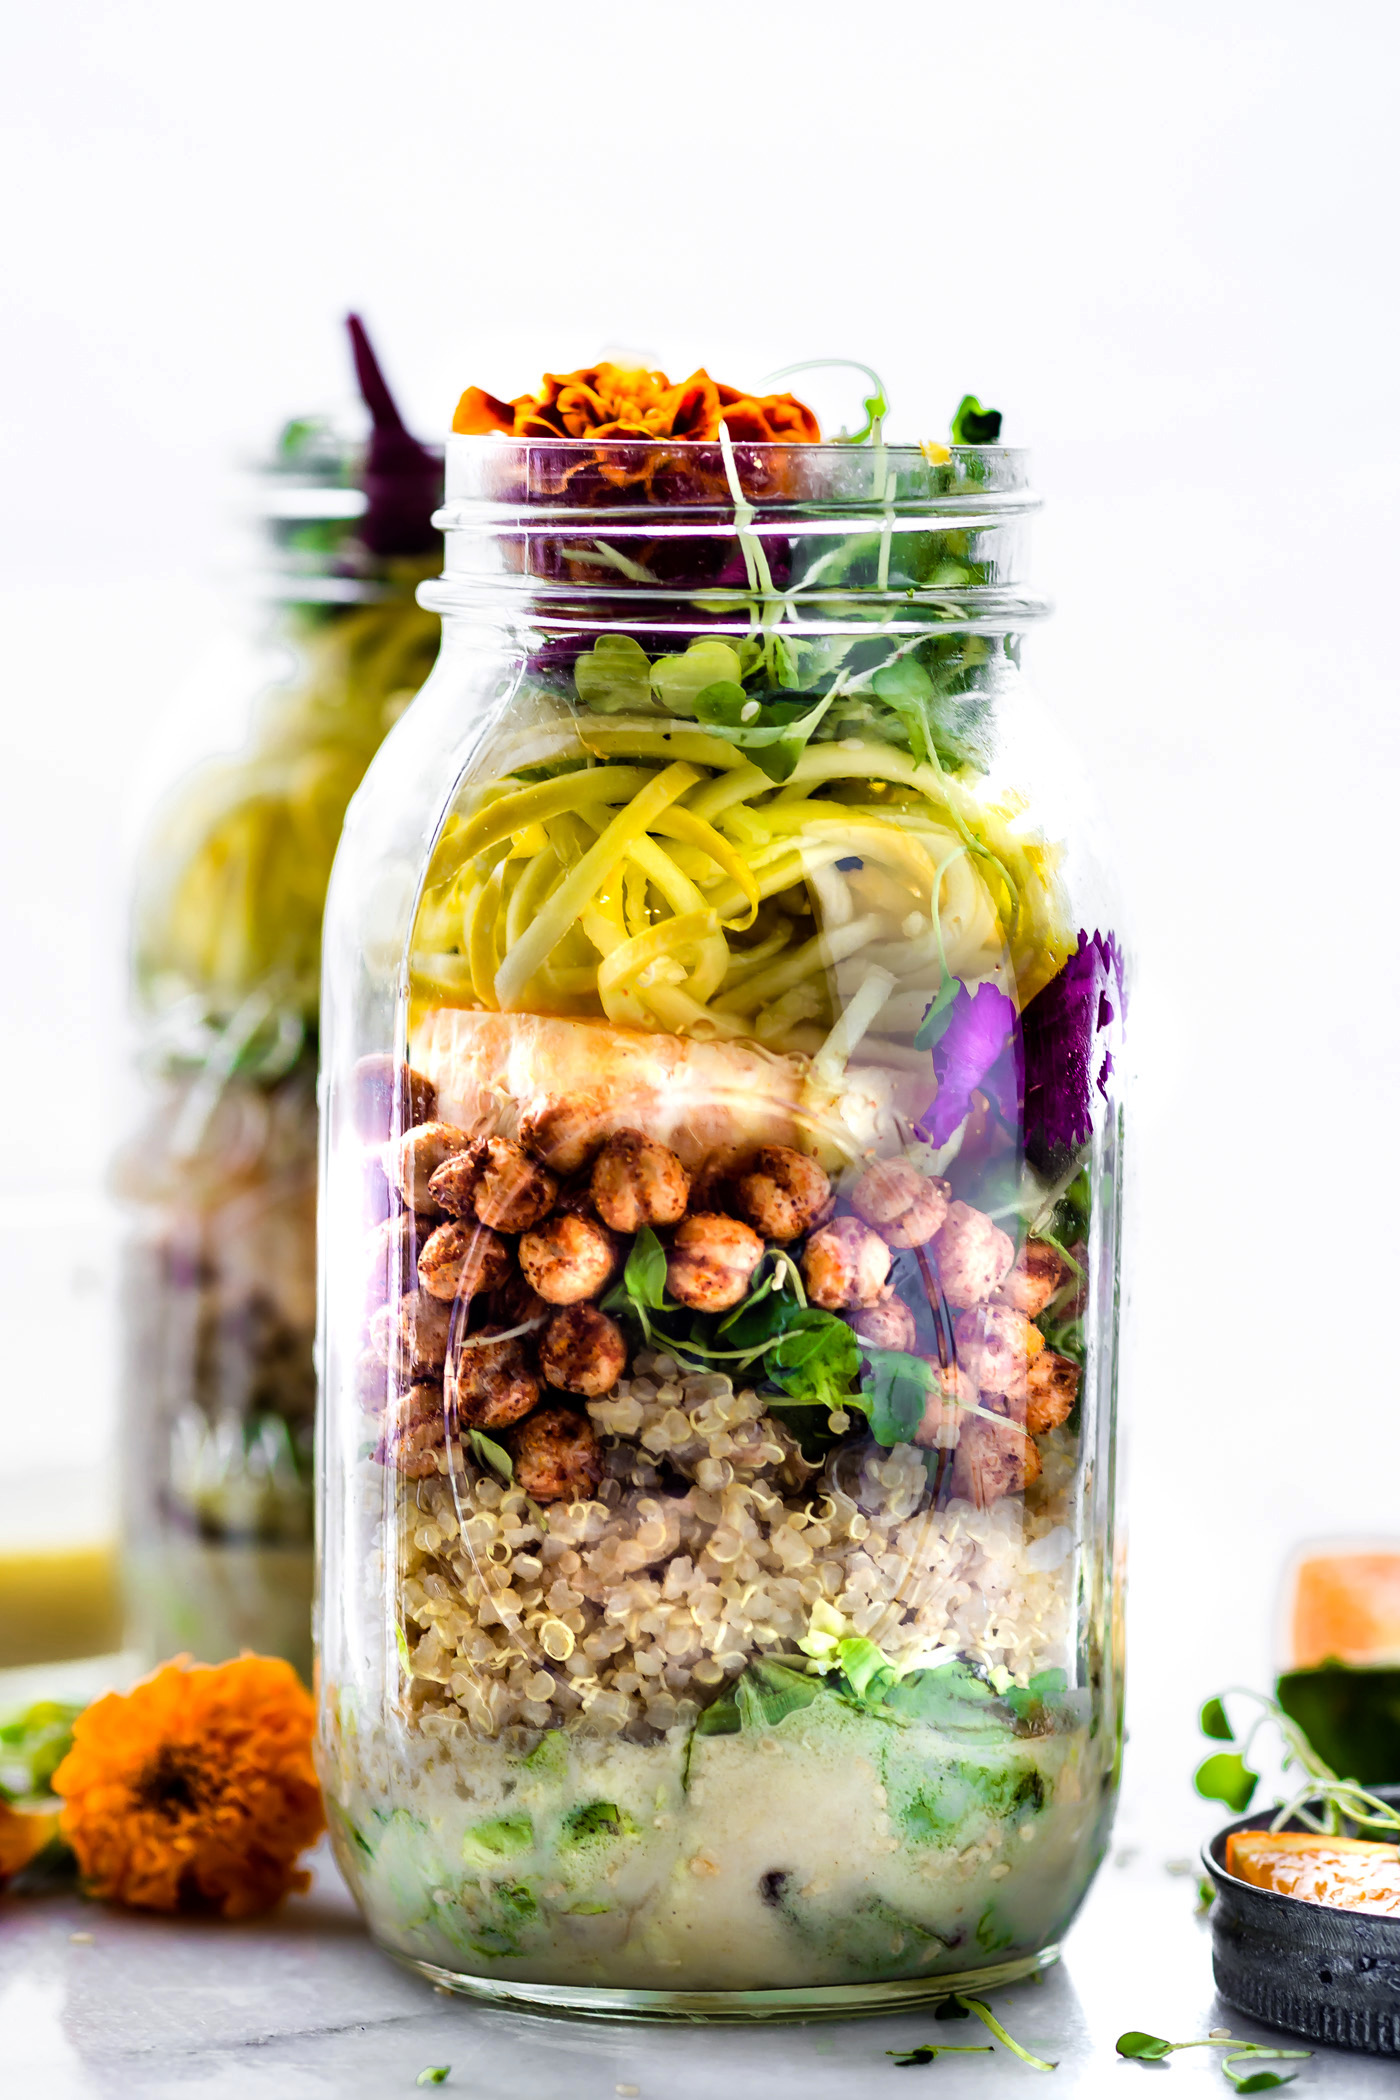 Mason jar salads are healthy, portable salads, picnic ready and packed with nourishment! This vegetarian Mason Jar Salad will keep you fueled and energized all day! Seasonal vegetables, roasted chickpeas, and a homemade sesame yogurt dressing make for a perfectly balanced lunch at home or on the go.